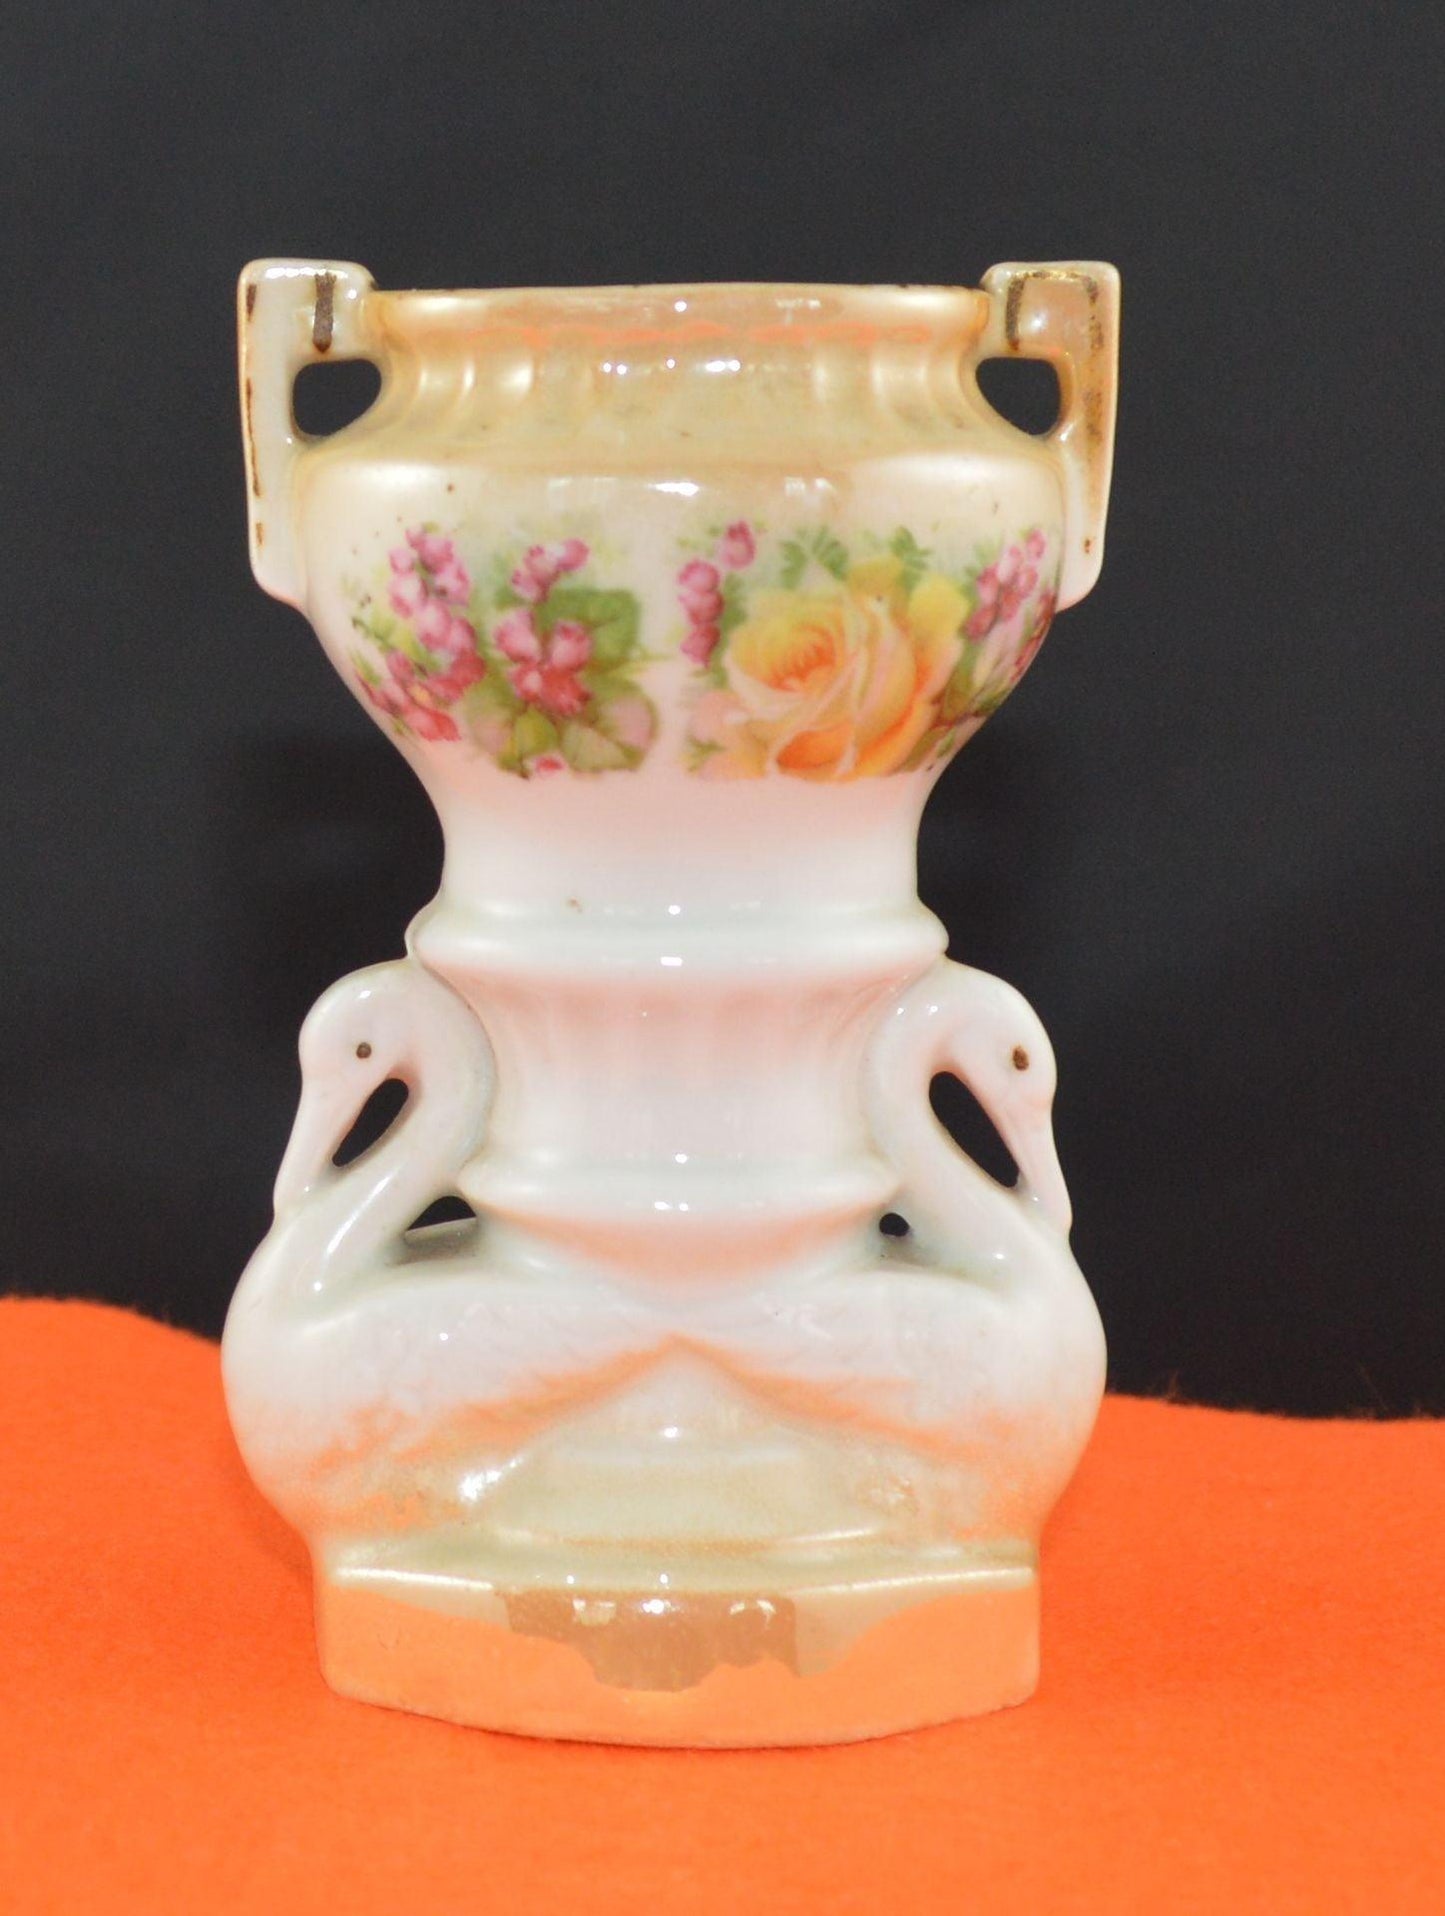 DECORATIVE ORNAMENT VERY SMALL URN VASE WITH SWAN HANDLES(PREVIOUSLY OWNED)FAIRLY GOOD CONDITION - TMD167207